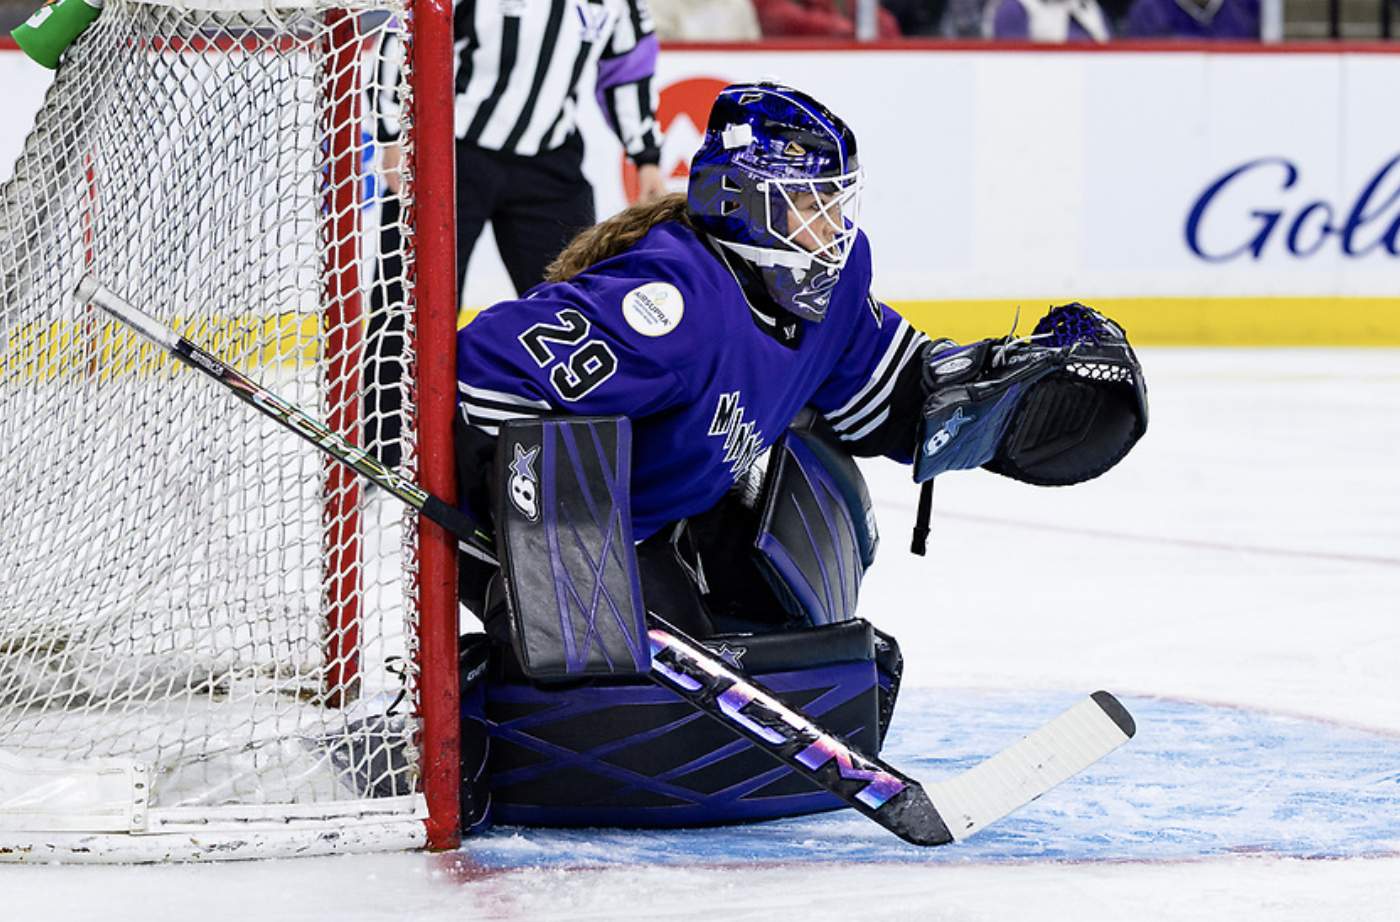 Hensley prepares to make a save from her knees against Boston. She is wearing black and purple goalie gear, and a purple mask and home uniform.